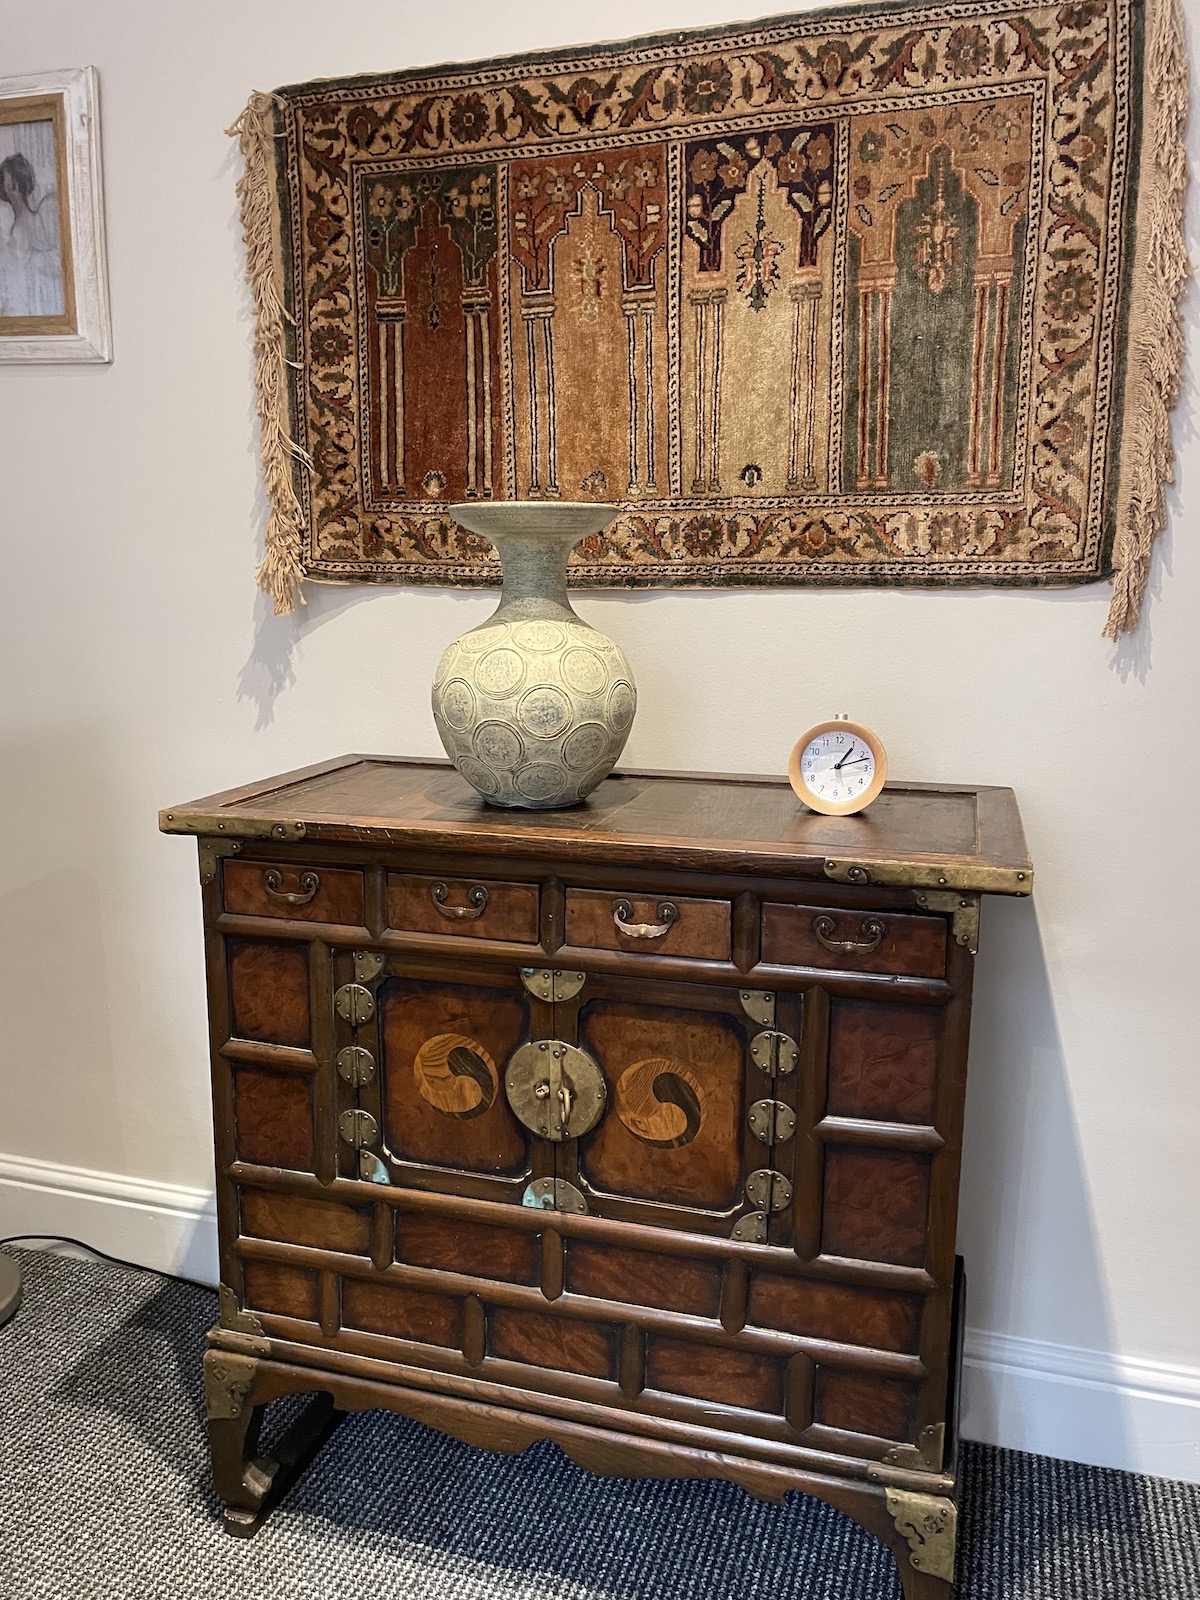 Cabinet and tapestry